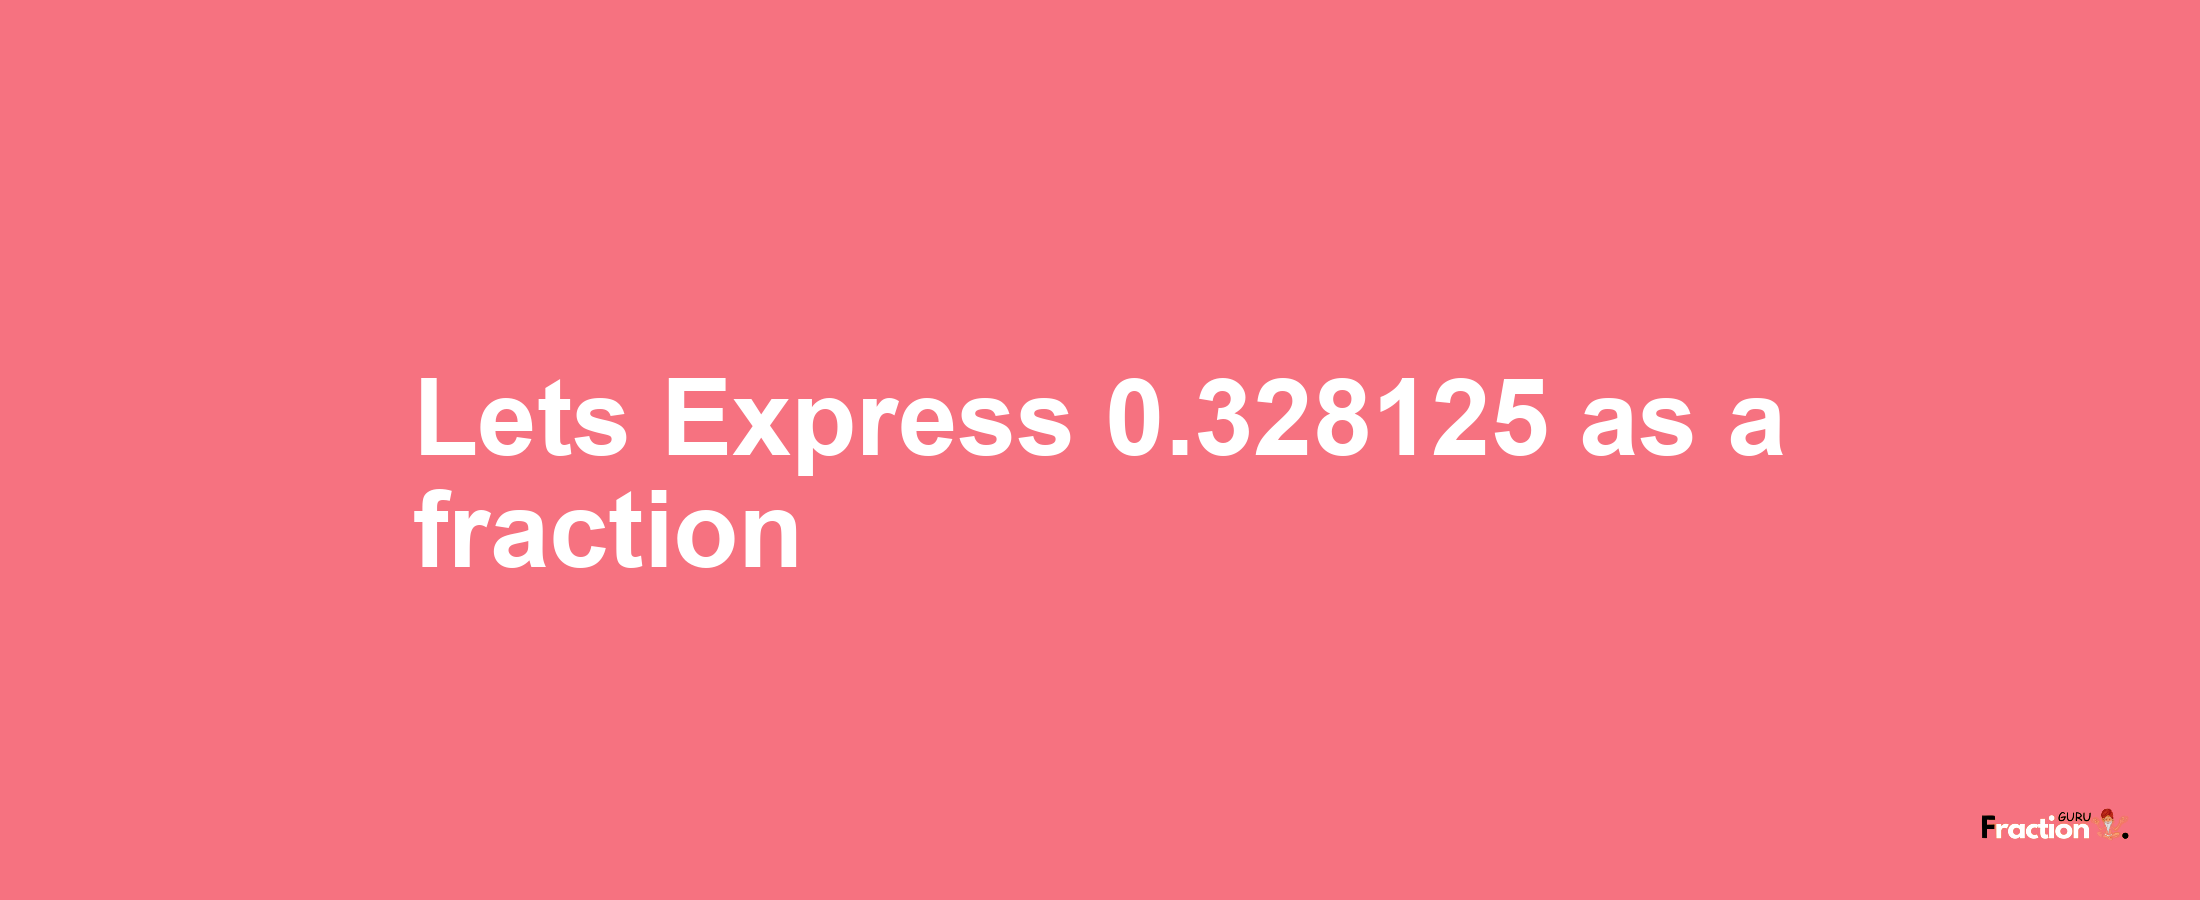 Lets Express 0.328125 as afraction